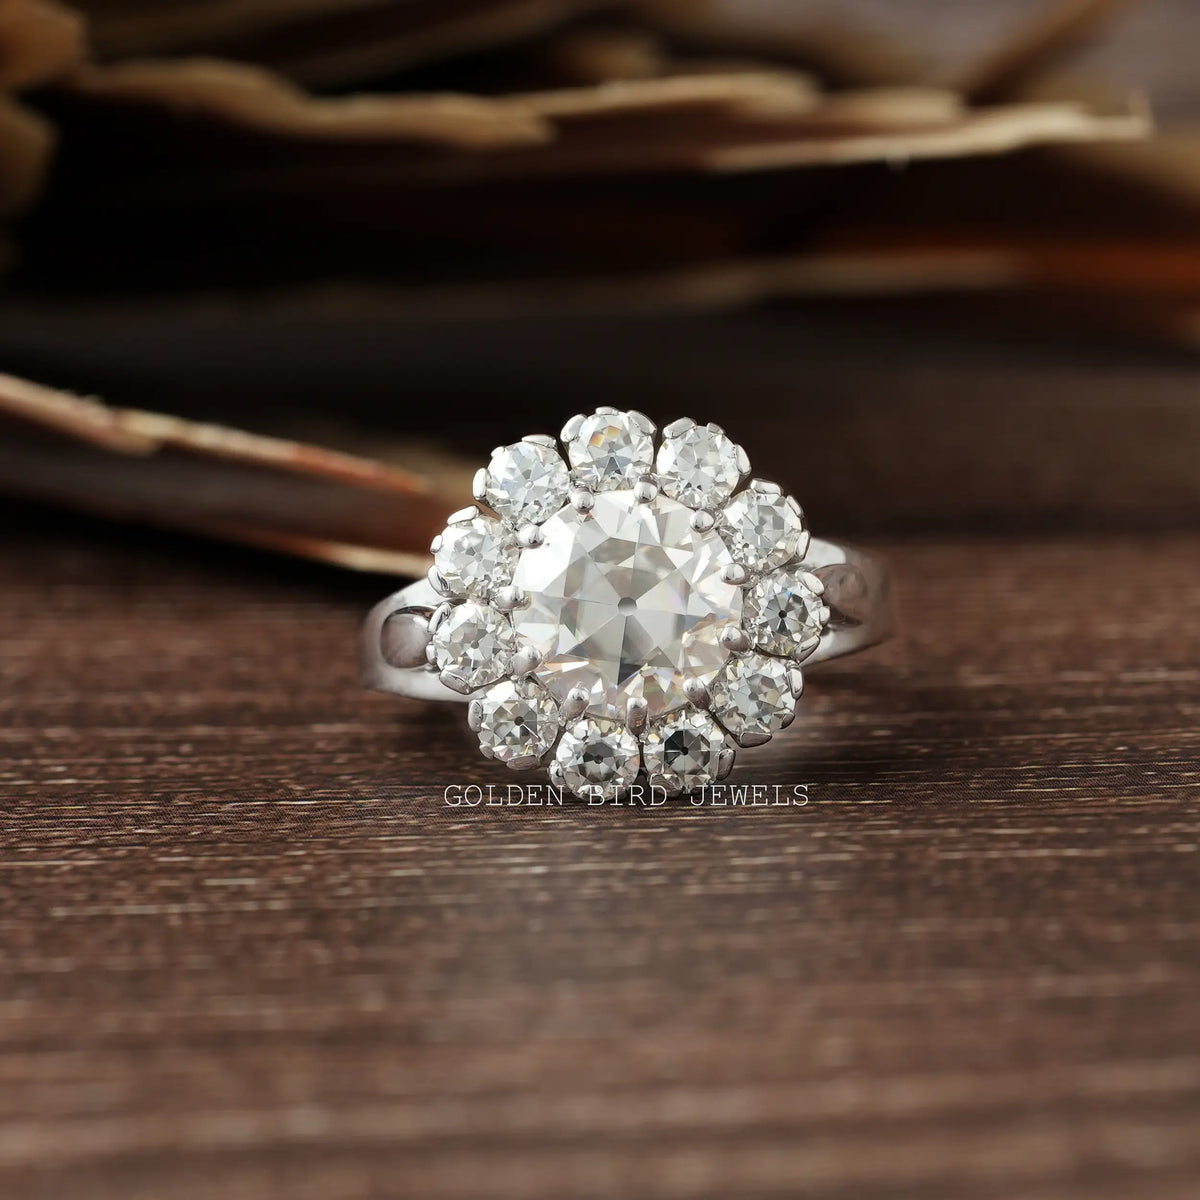 [Front view of old european round cut floral style vintage ring]-[Golden Bird Jewels]